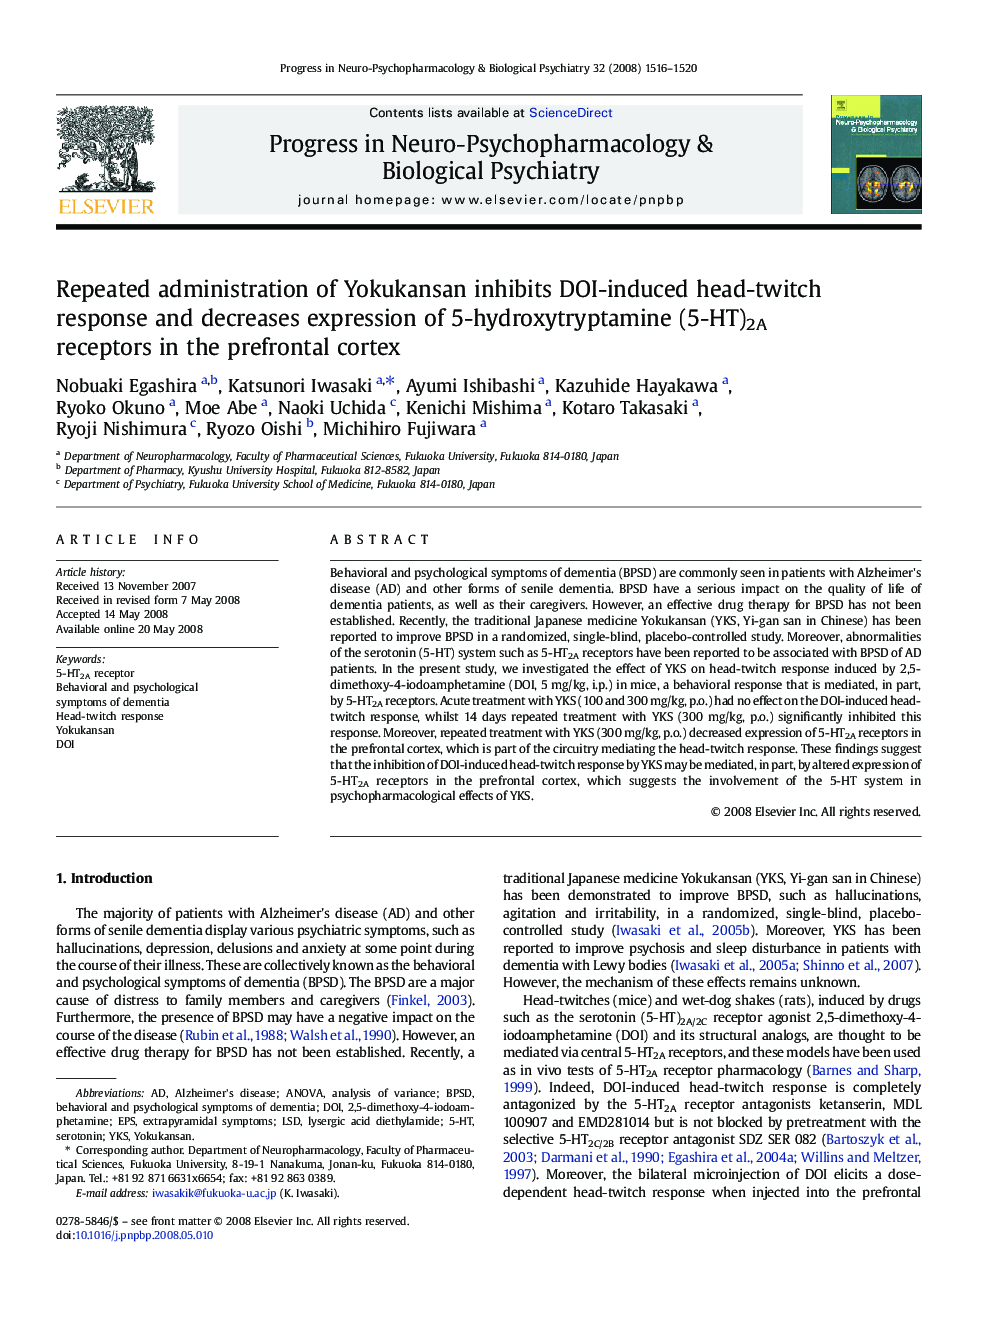 Repeated administration of Yokukansan inhibits DOI-induced head-twitch response and decreases expression of 5-hydroxytryptamine (5-HT)2A receptors in the prefrontal cortex